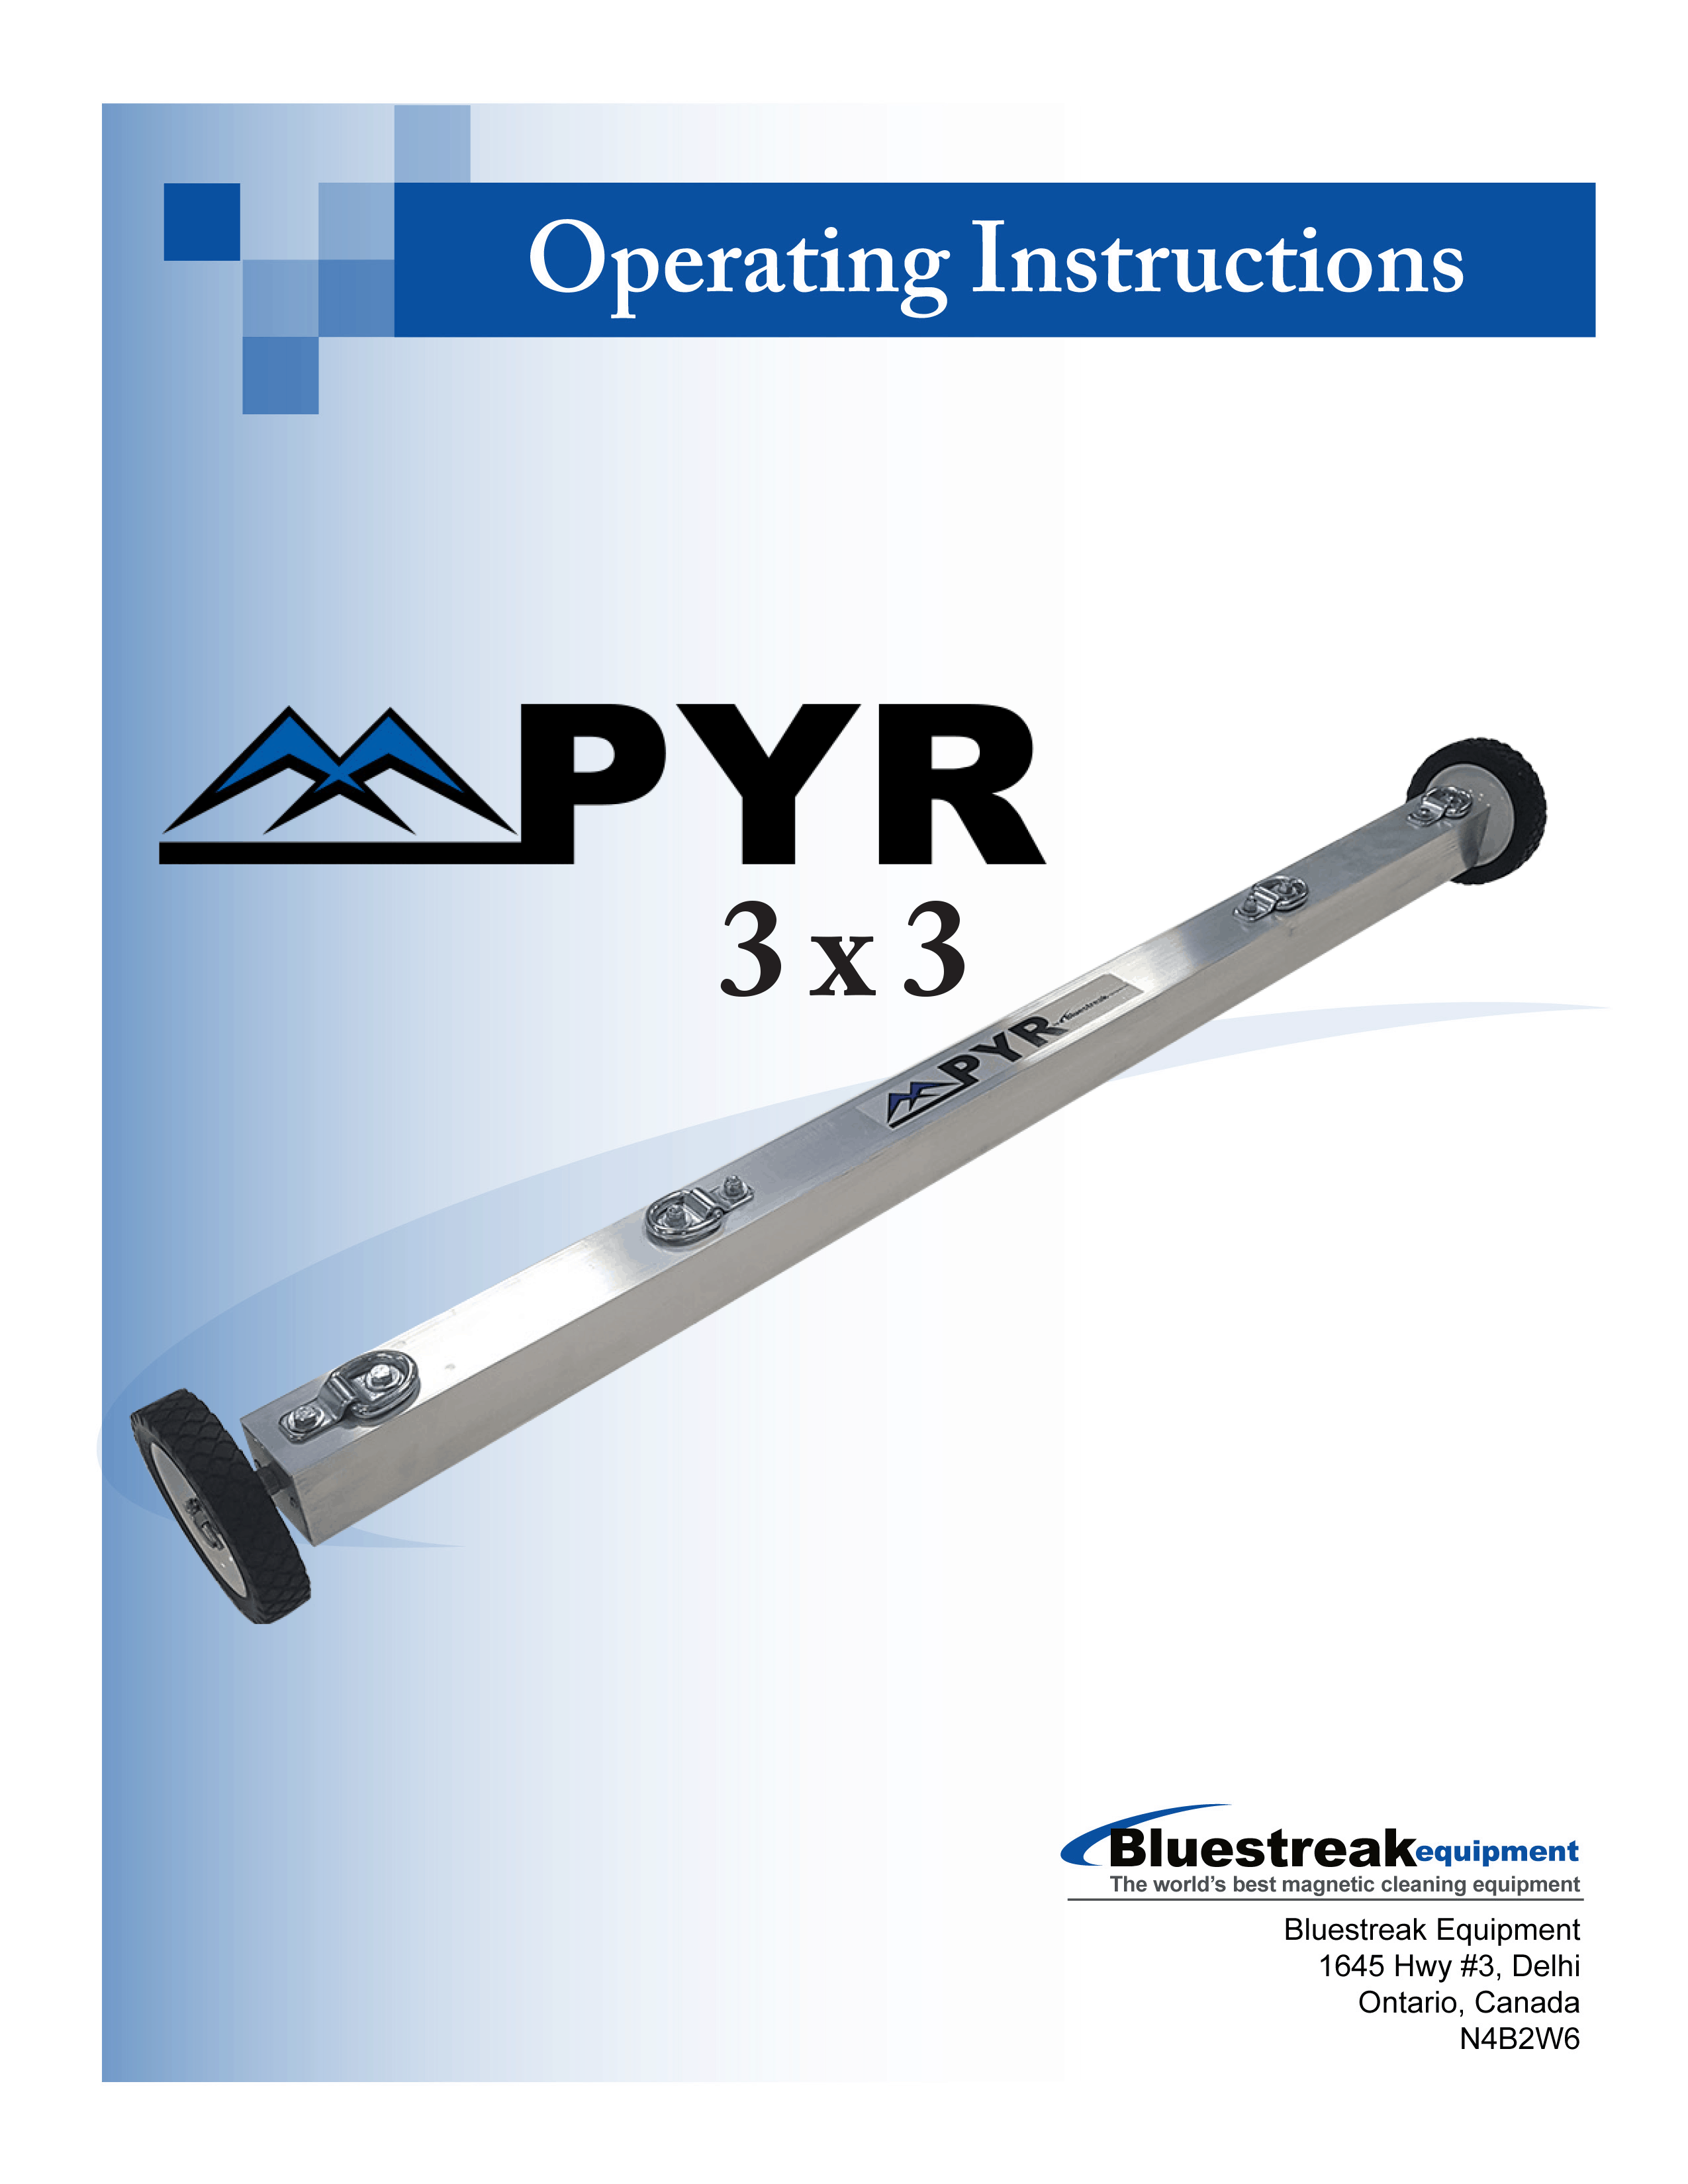 Pyr 3x3 Operating Instructions